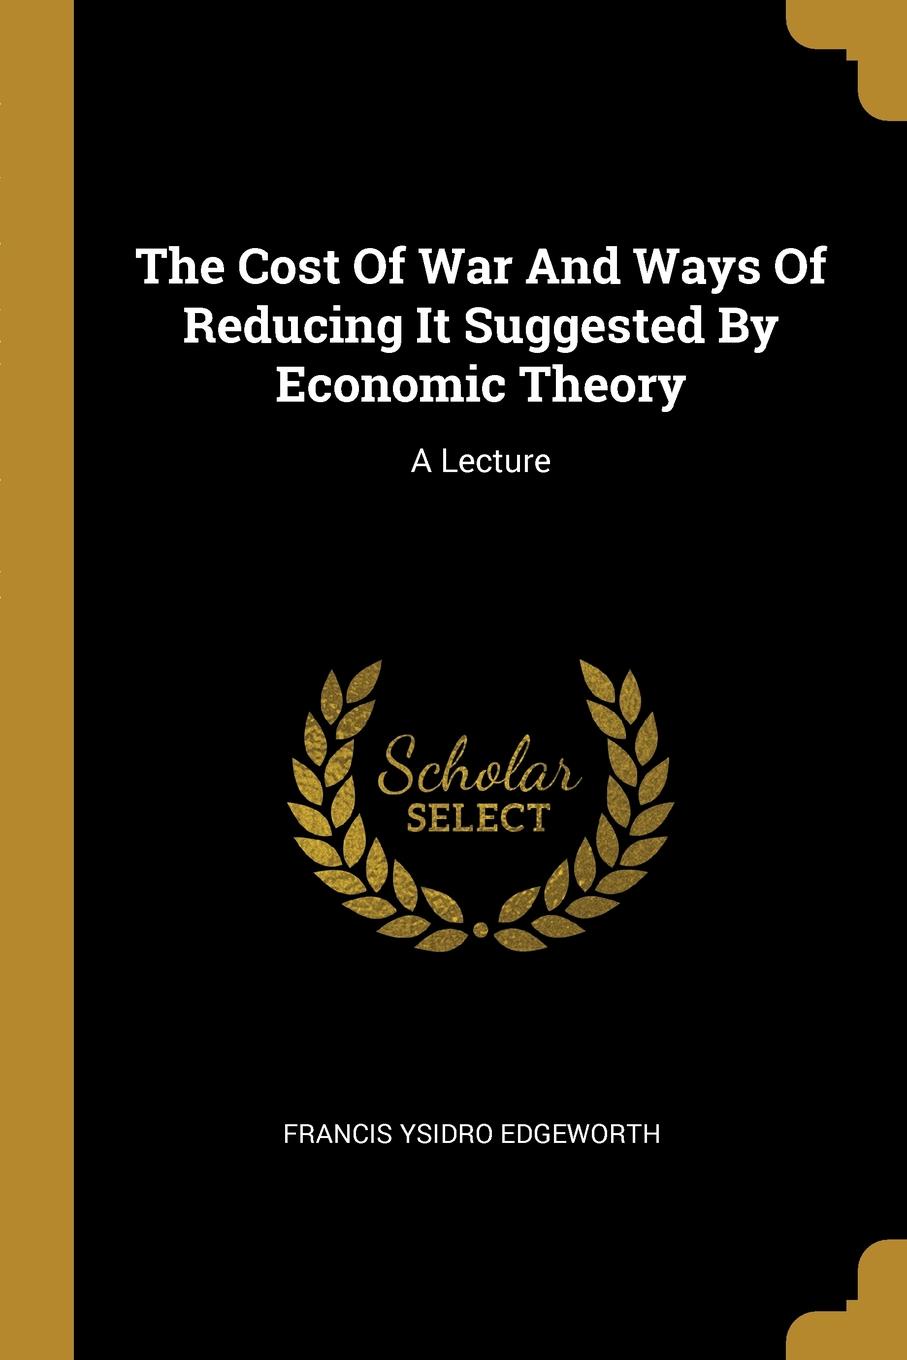 The Cost Of War And Ways Of Reducing It Suggested By Economic Theory. A Lecture